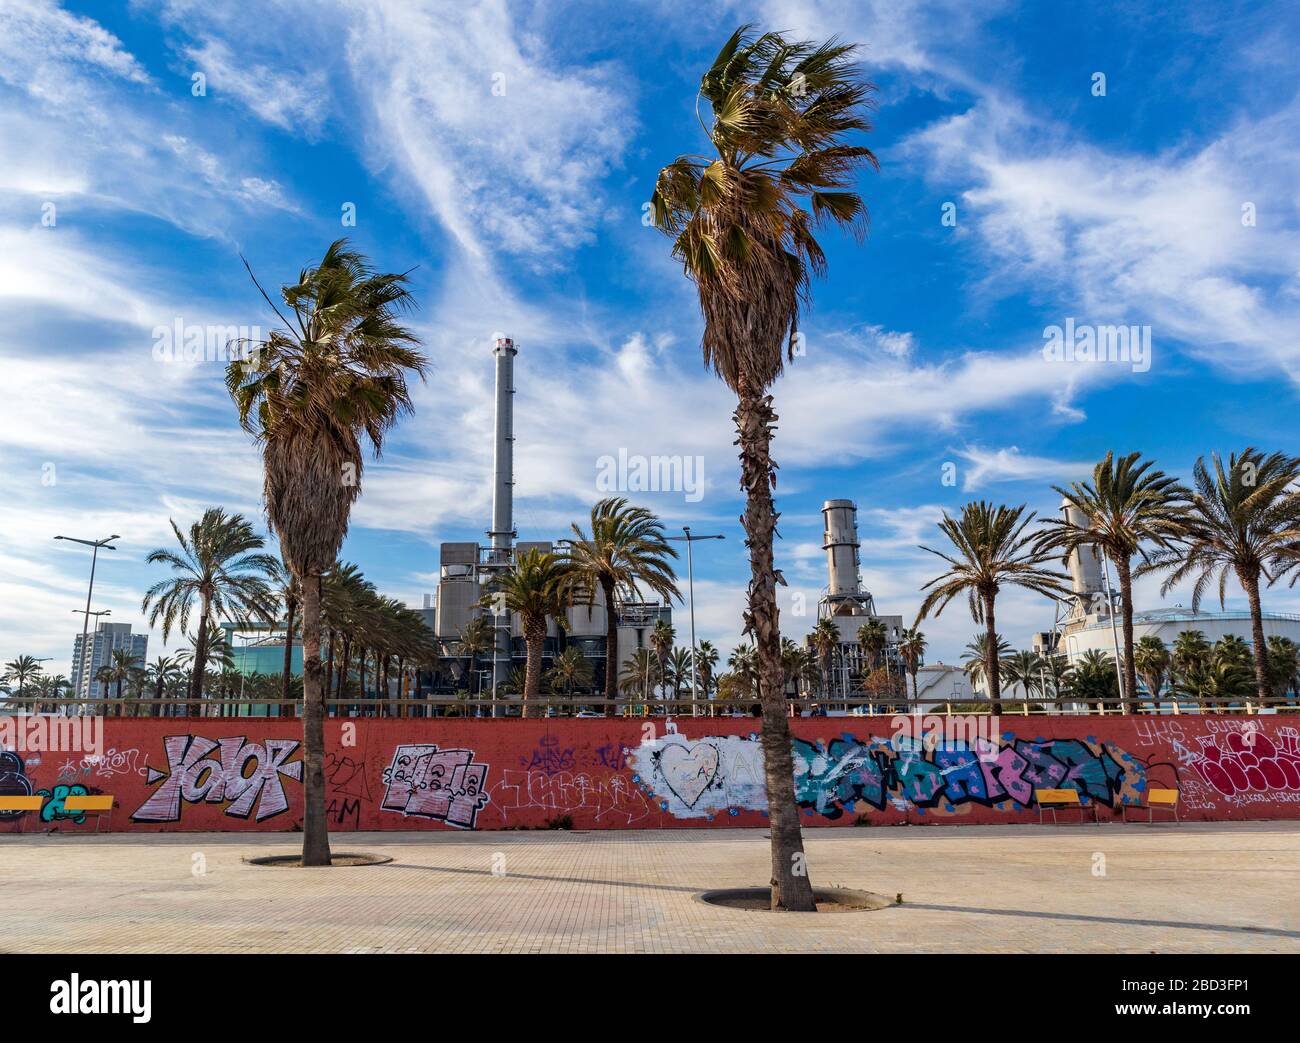 Factories, palm trees and graffiti in front in the middle of the city Stock Photo